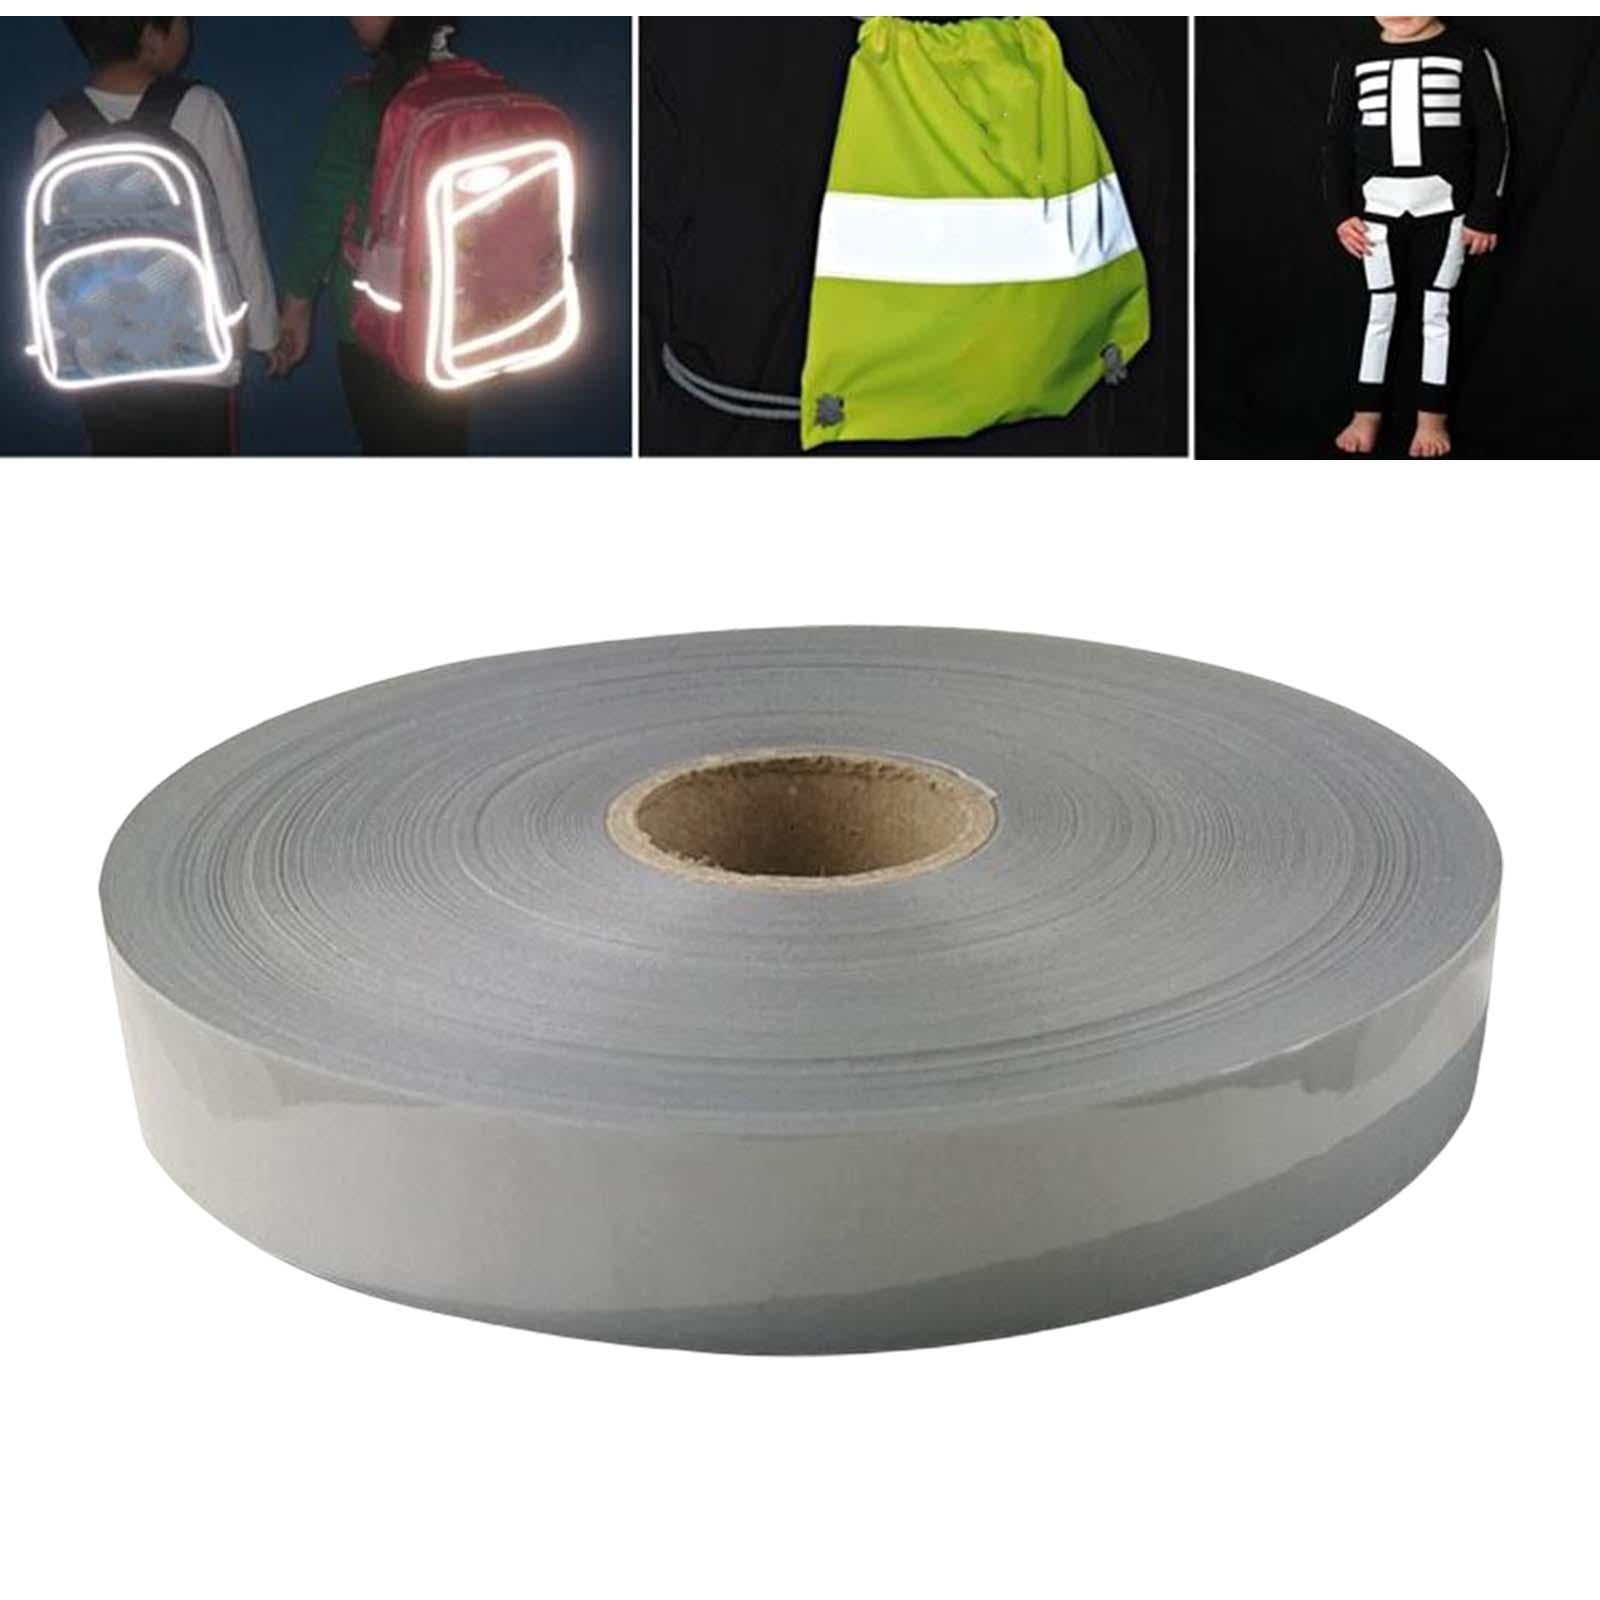 Reflective Tape, Heat Transfer Vinyl Film Iron on Tape for Clothing 1x 33 ft - Gray - 1 inch x 33 Feet